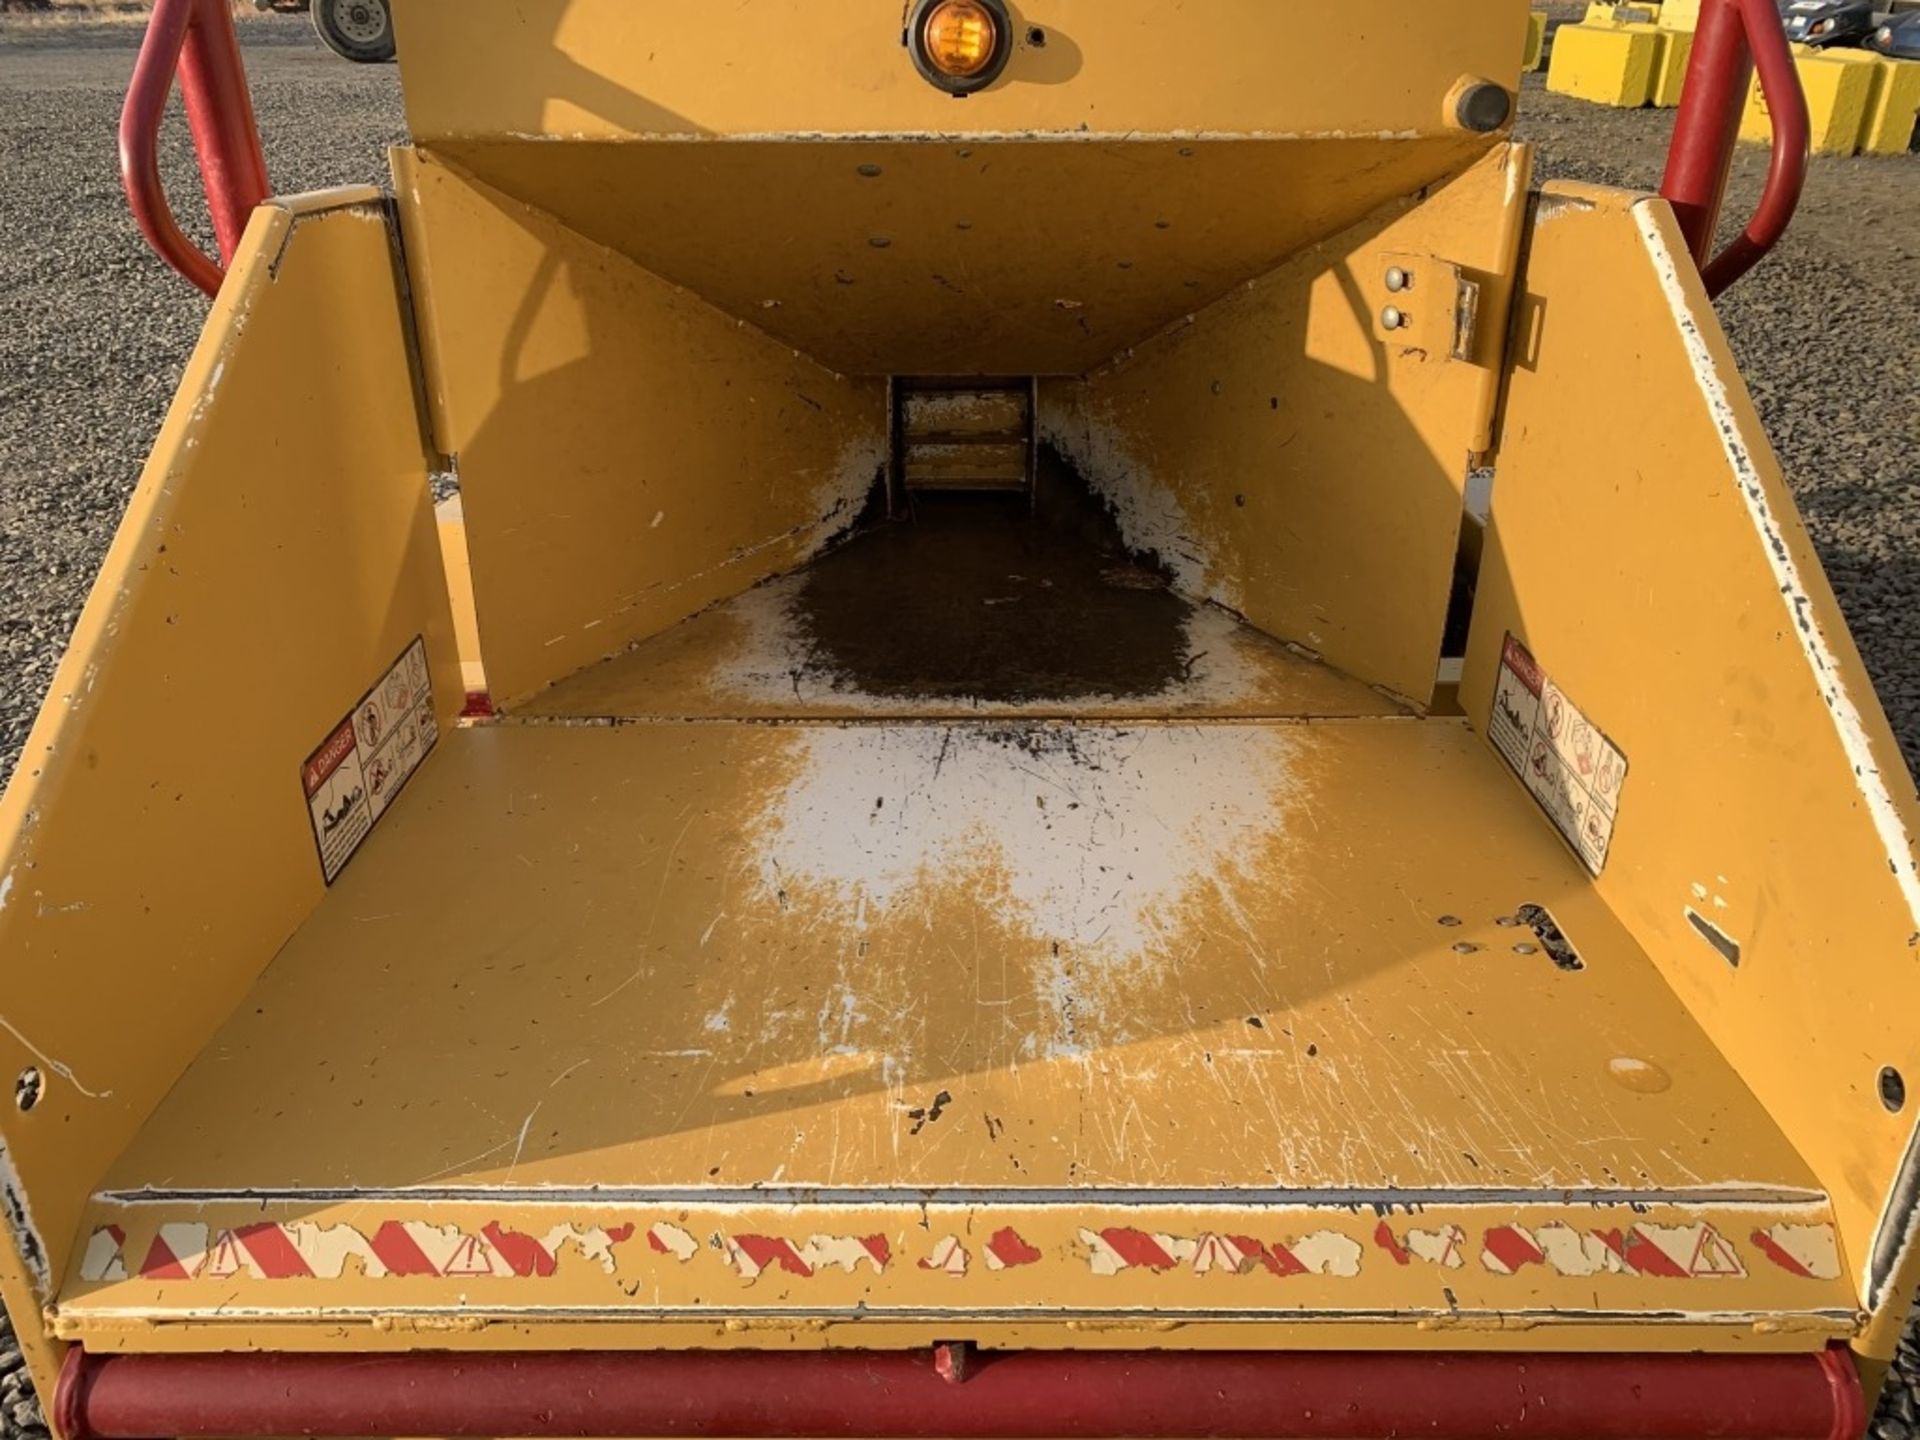 2016 Vermeer BC700XL Towable Chipper - Image 8 of 13